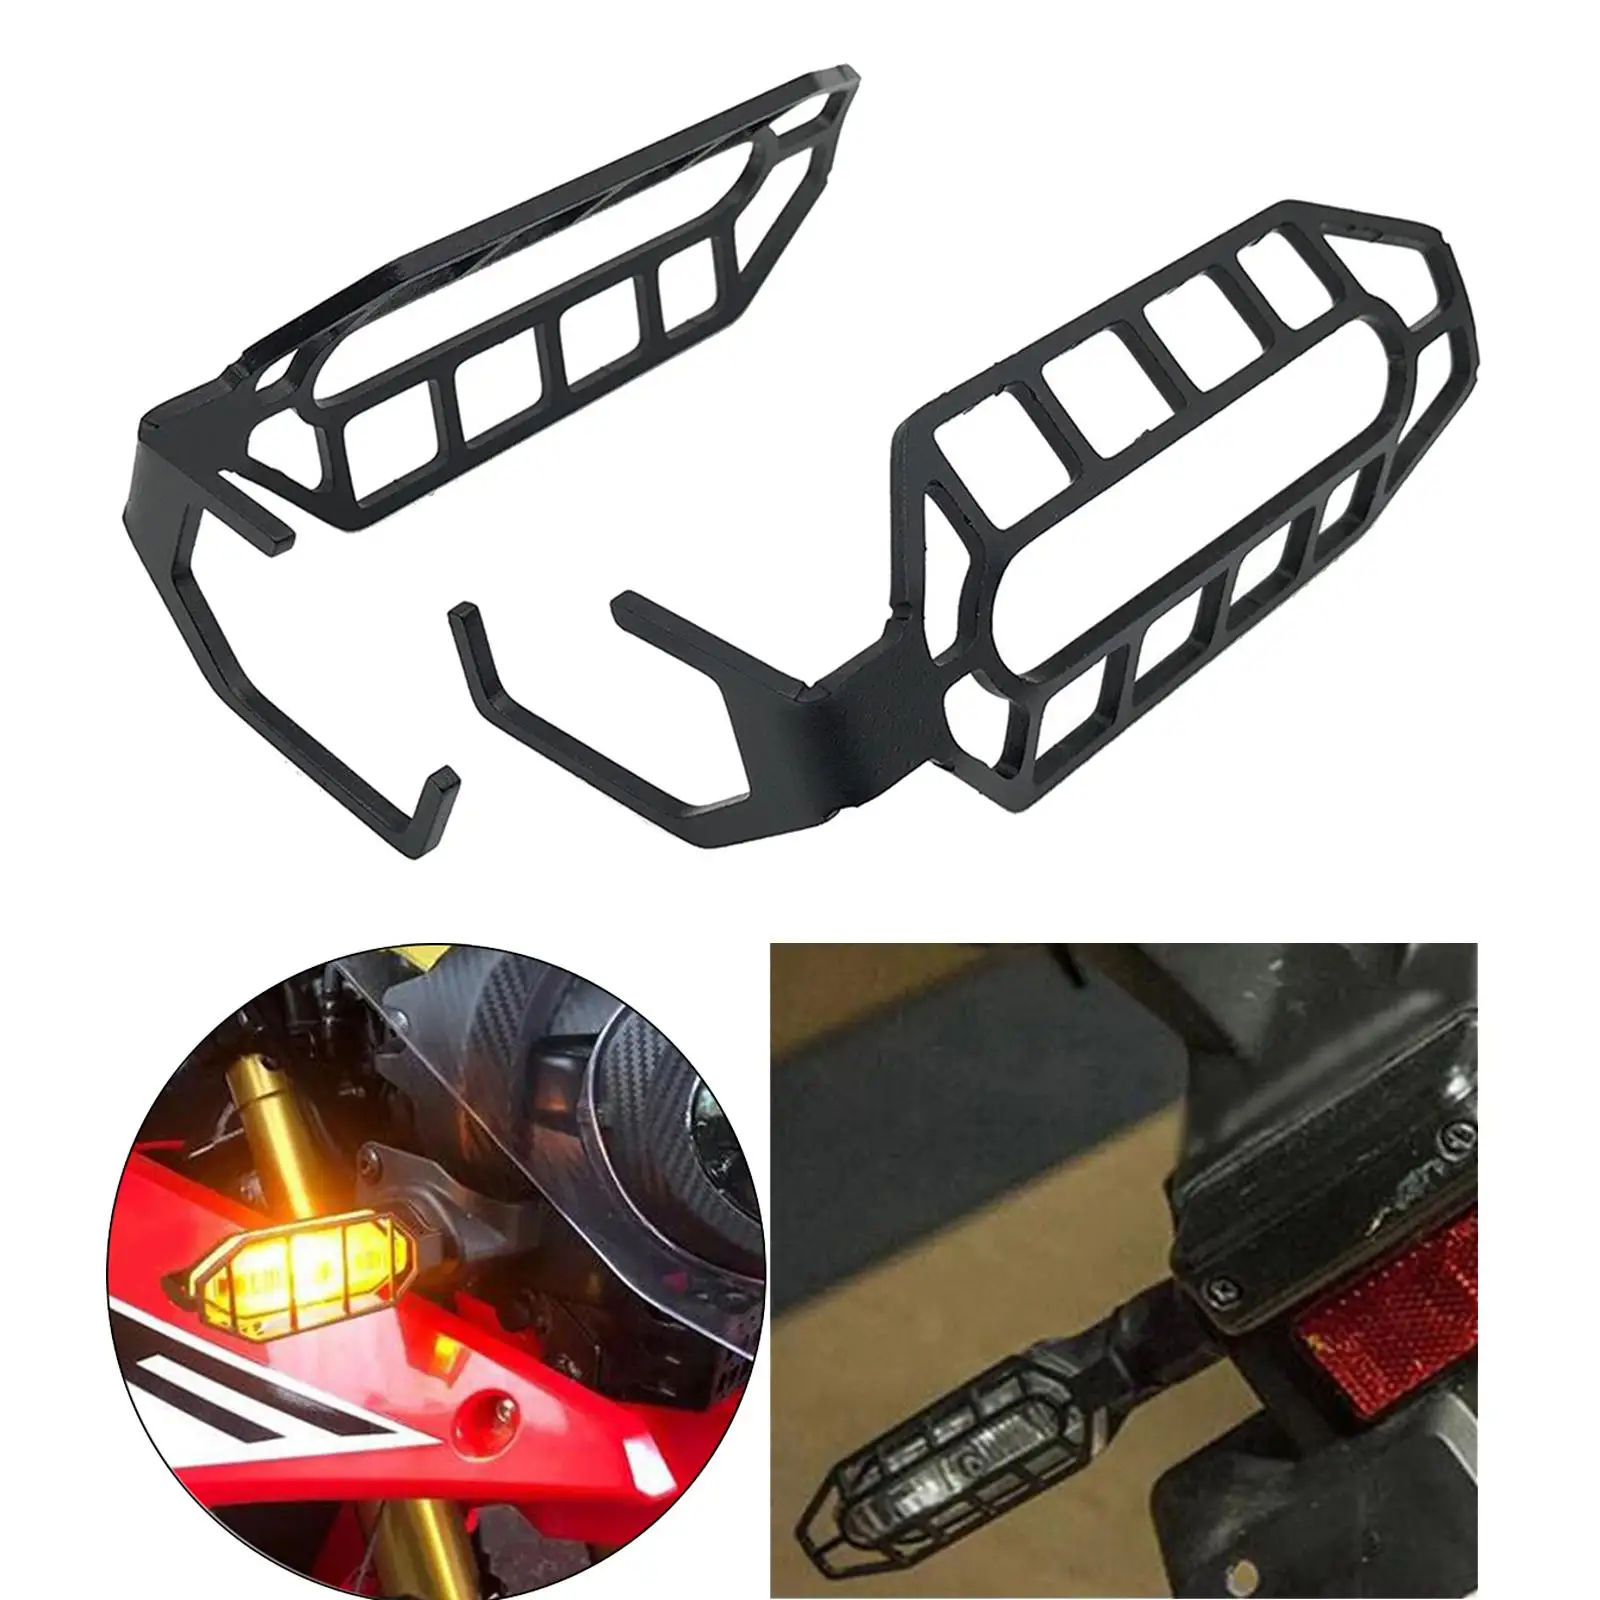 2x Stainless Steel Motorcycle Turn Signal Light Shield Guard Cover For Honda CB500X CB 500X 2019 2020